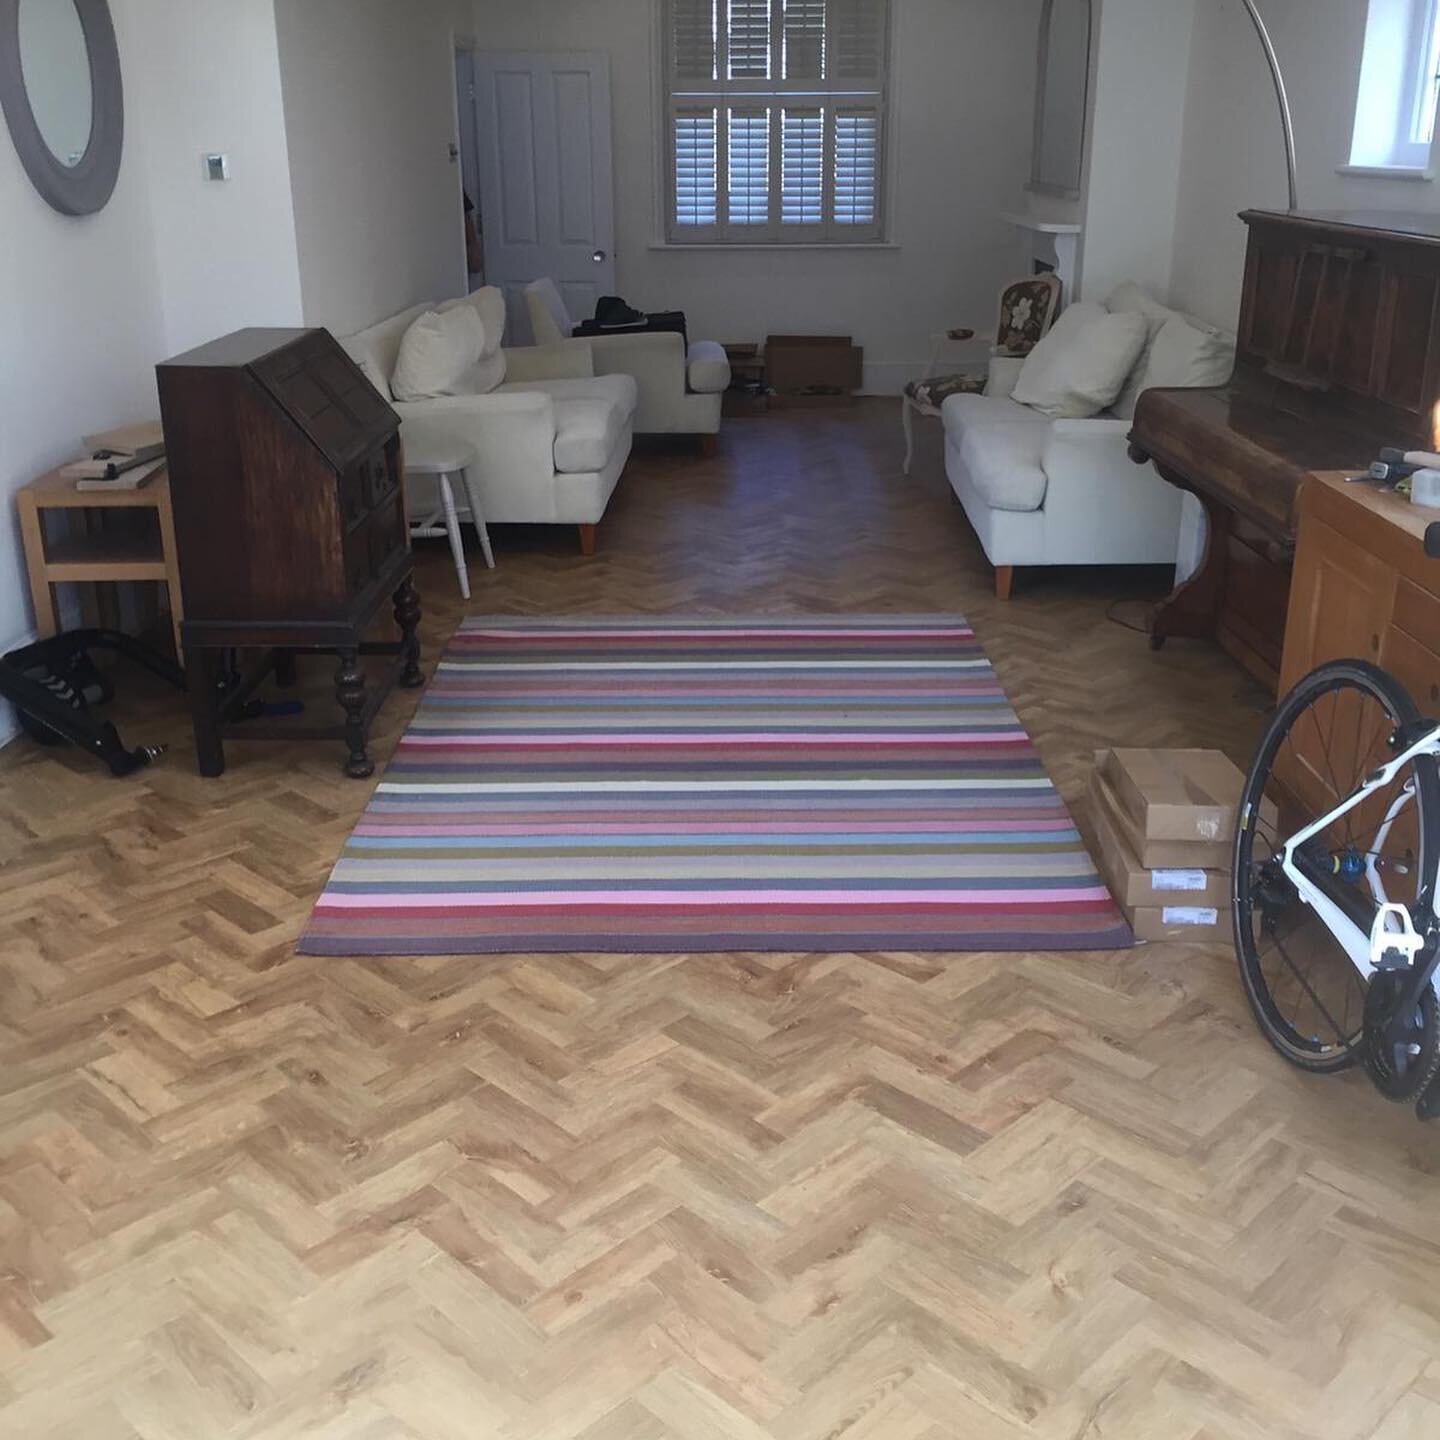 We stock and fit all types of hard flooring, including LVT favourites #kardean and #amtico